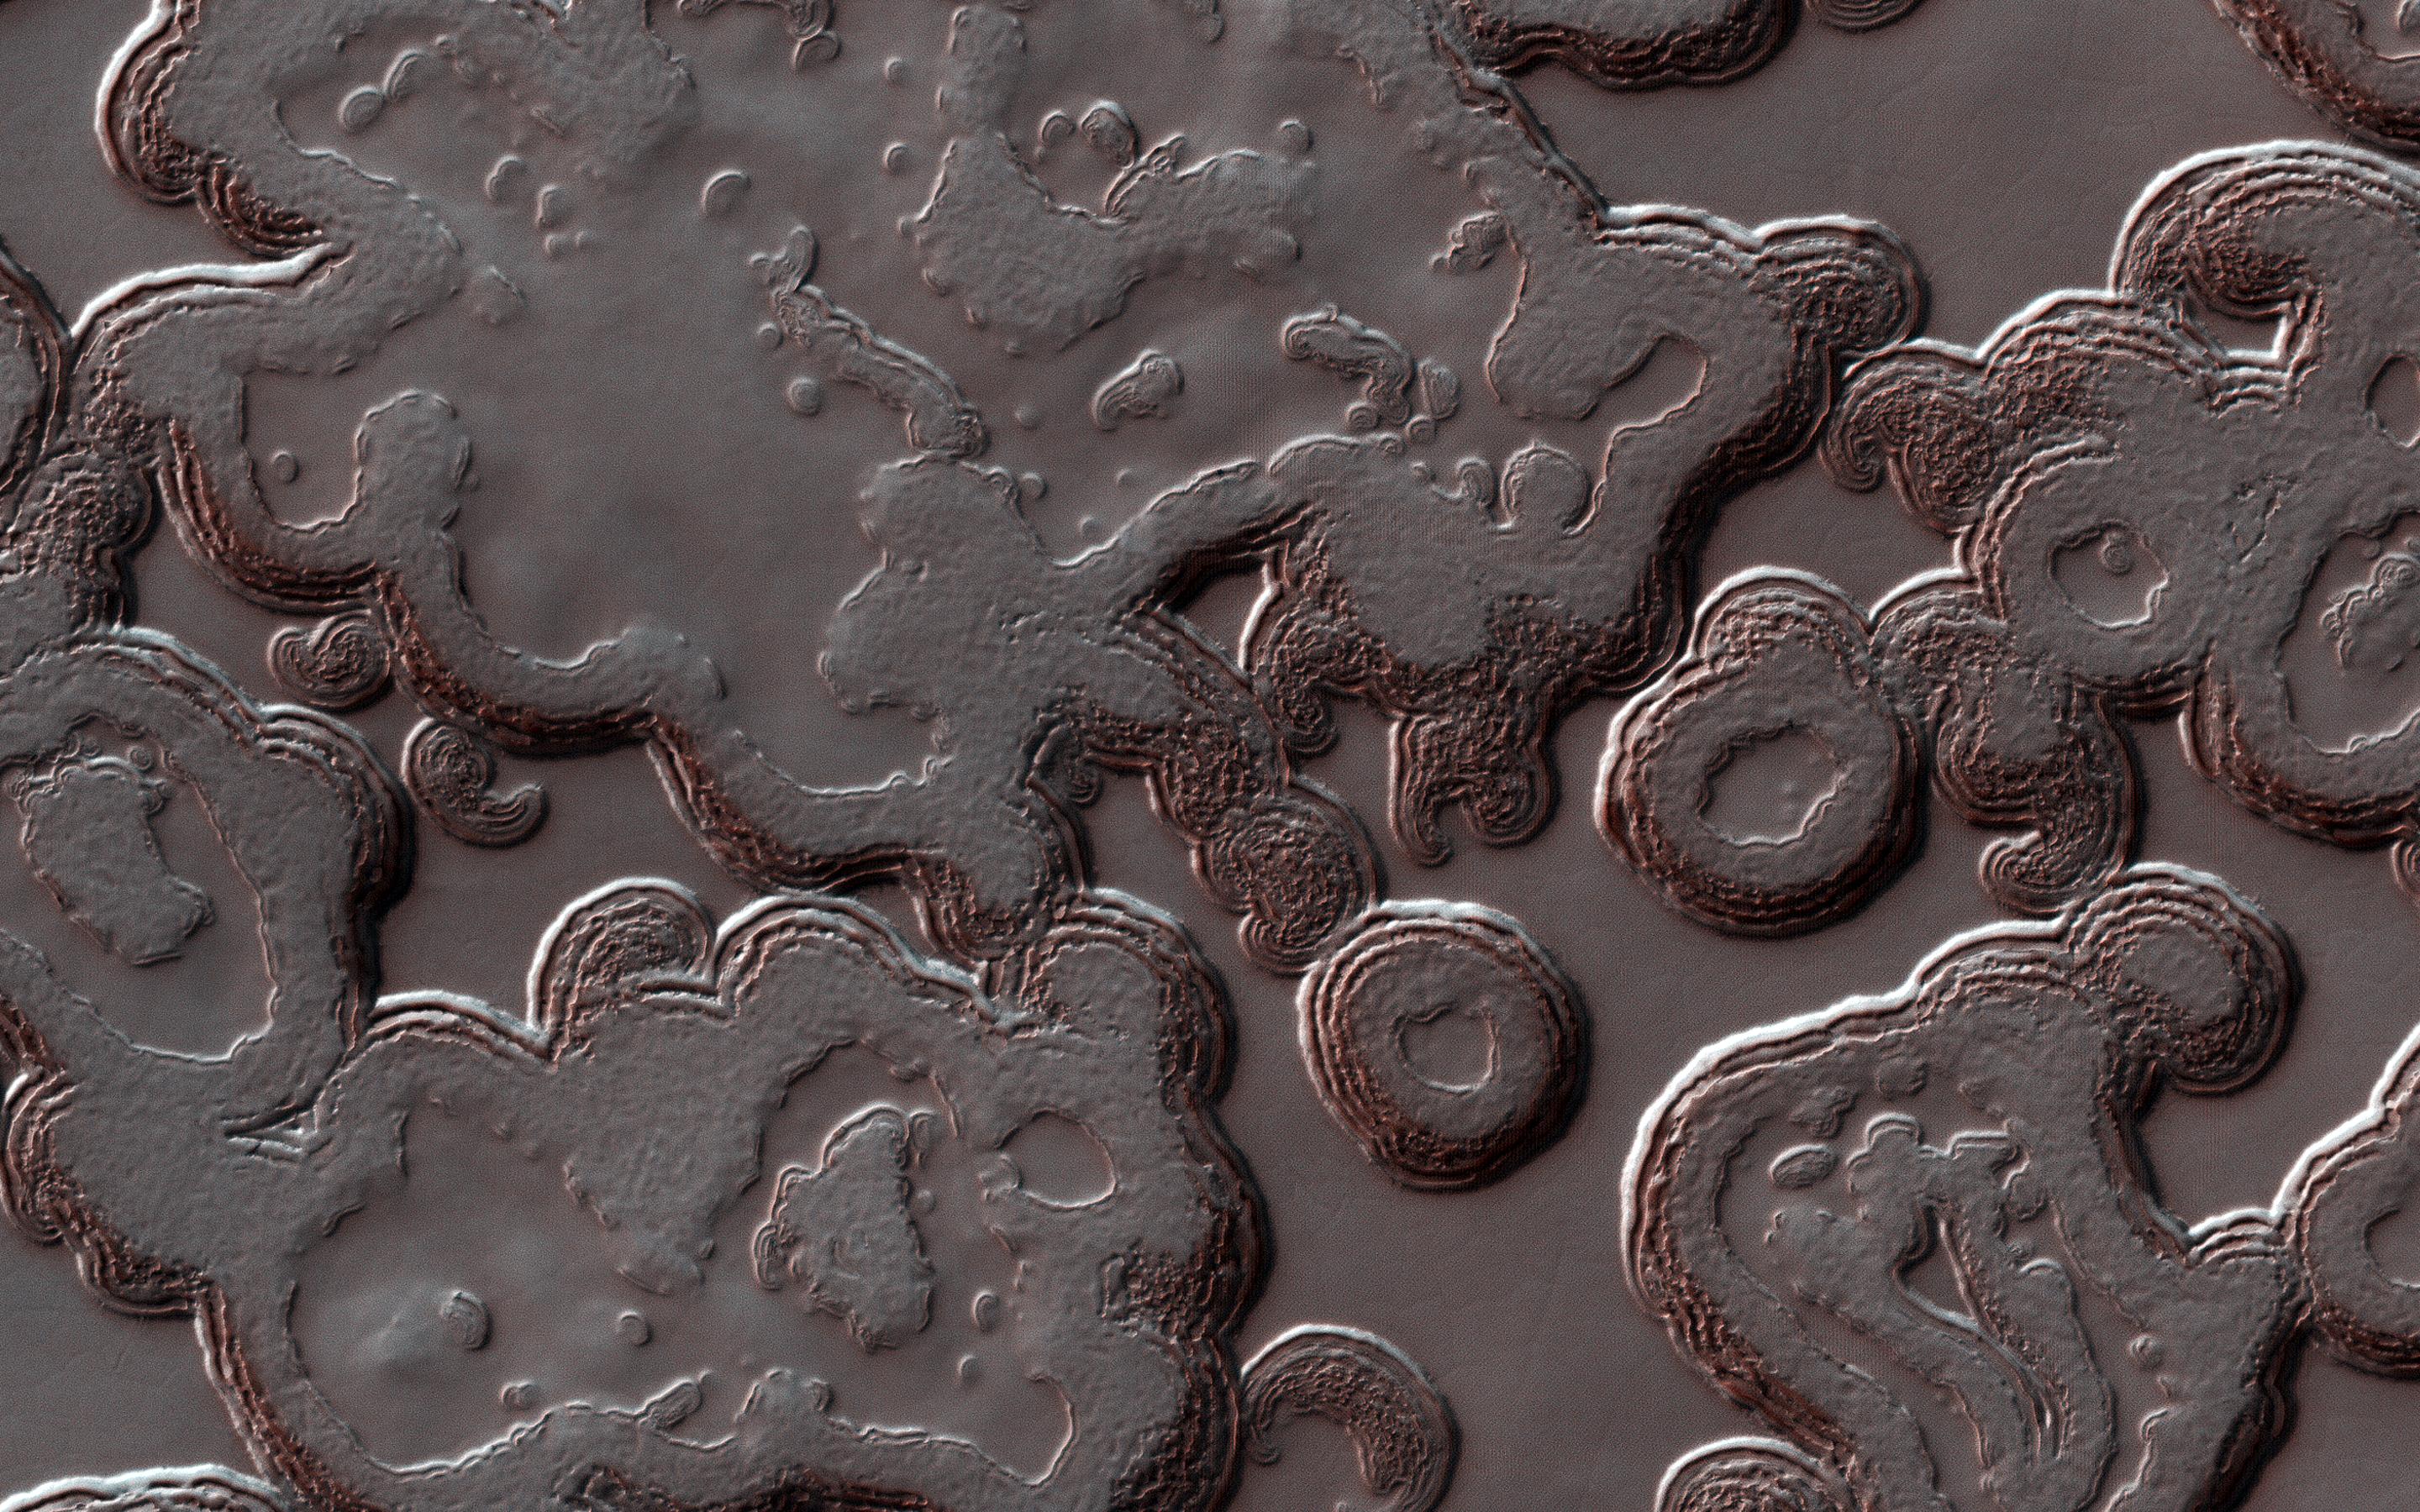 PIA22895: Swiss Cheese on a Red Planet